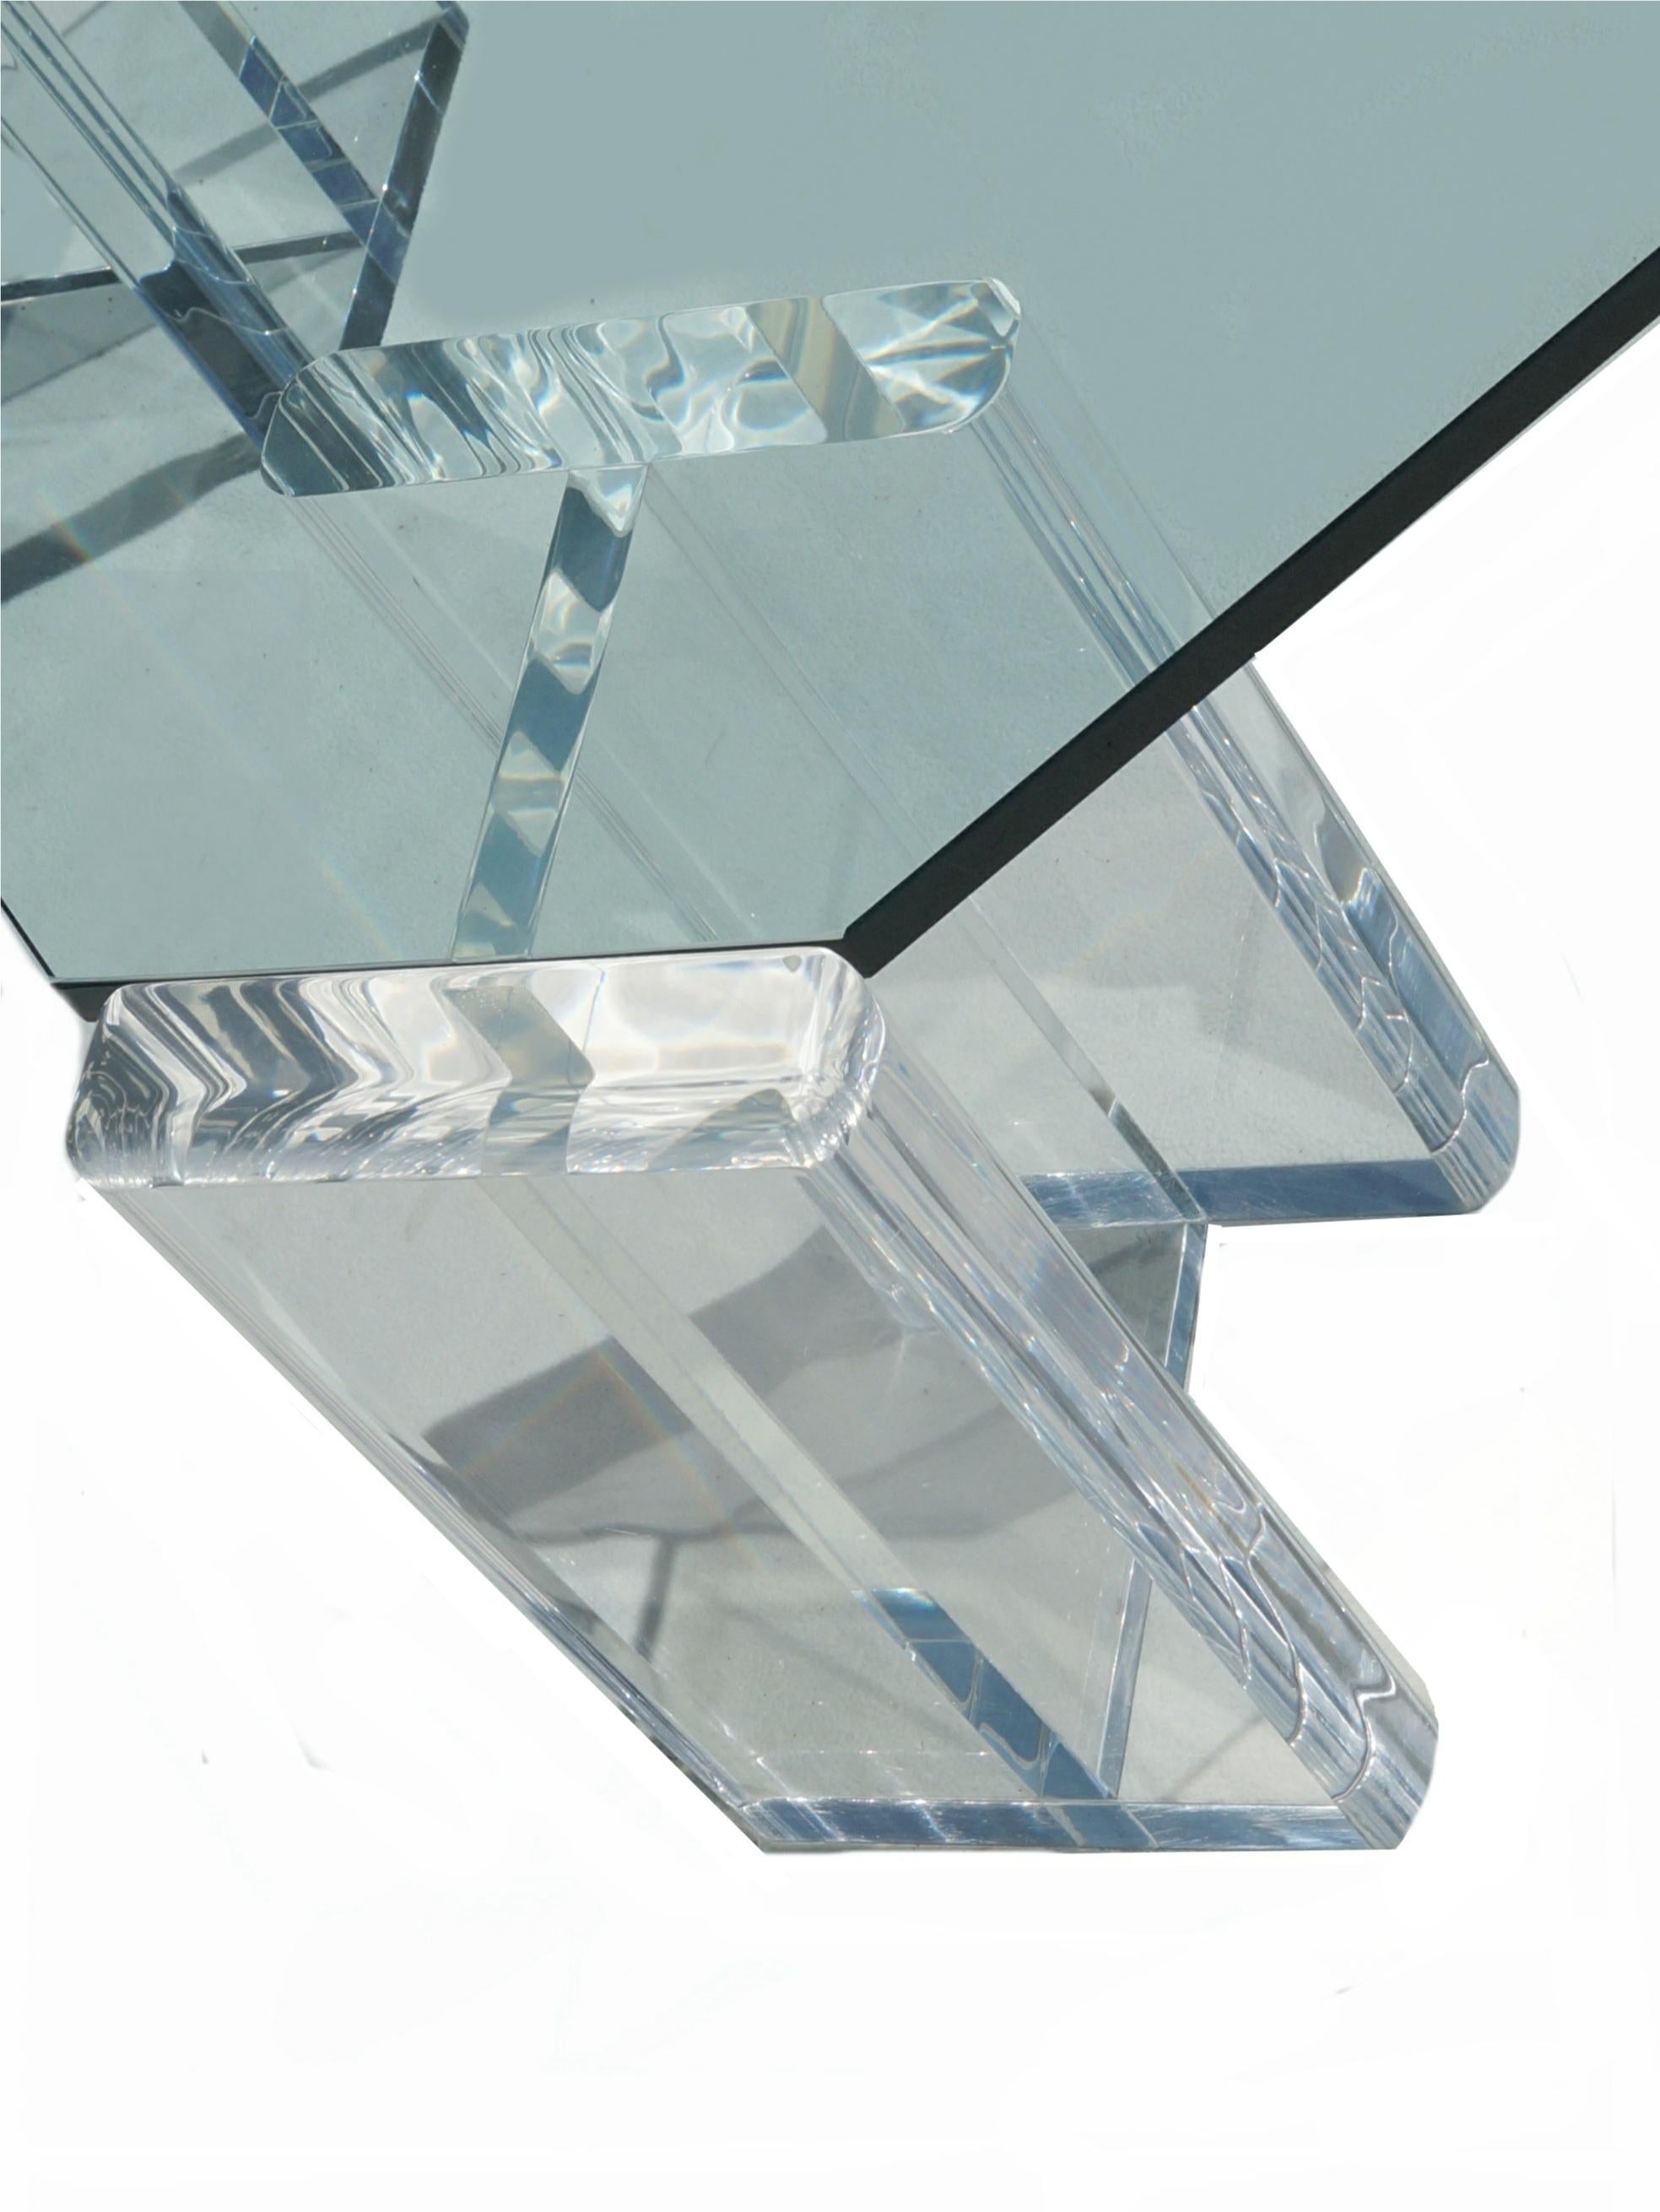 1970s Modern Hollywood Regency Lucite Glass Top Coffee Table For Sale 3